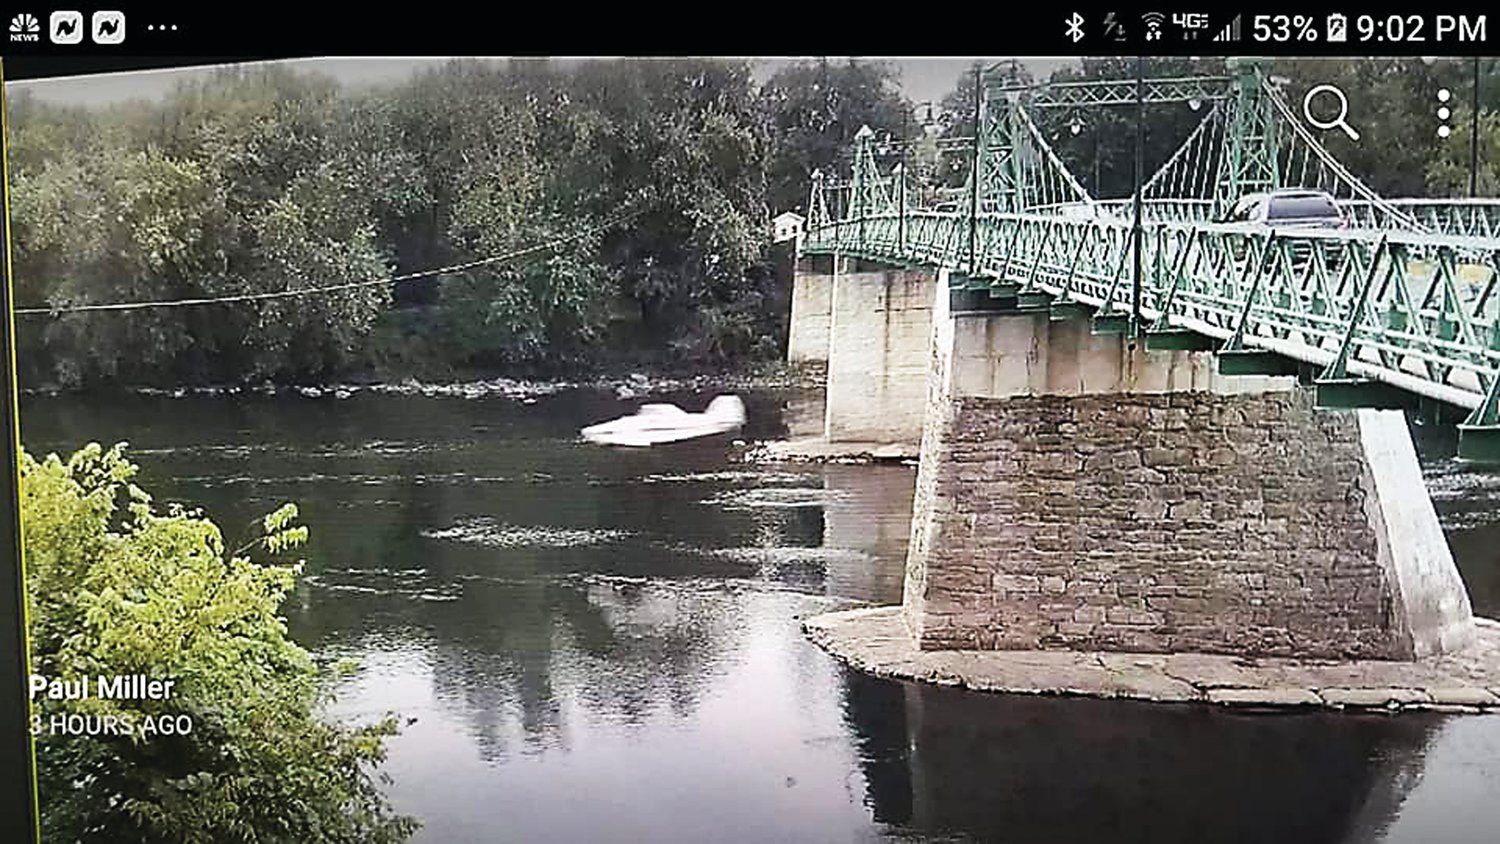 A photo of the plane flying under the Riegelsville Bridge was posted on the Riegelsville Facebook site.